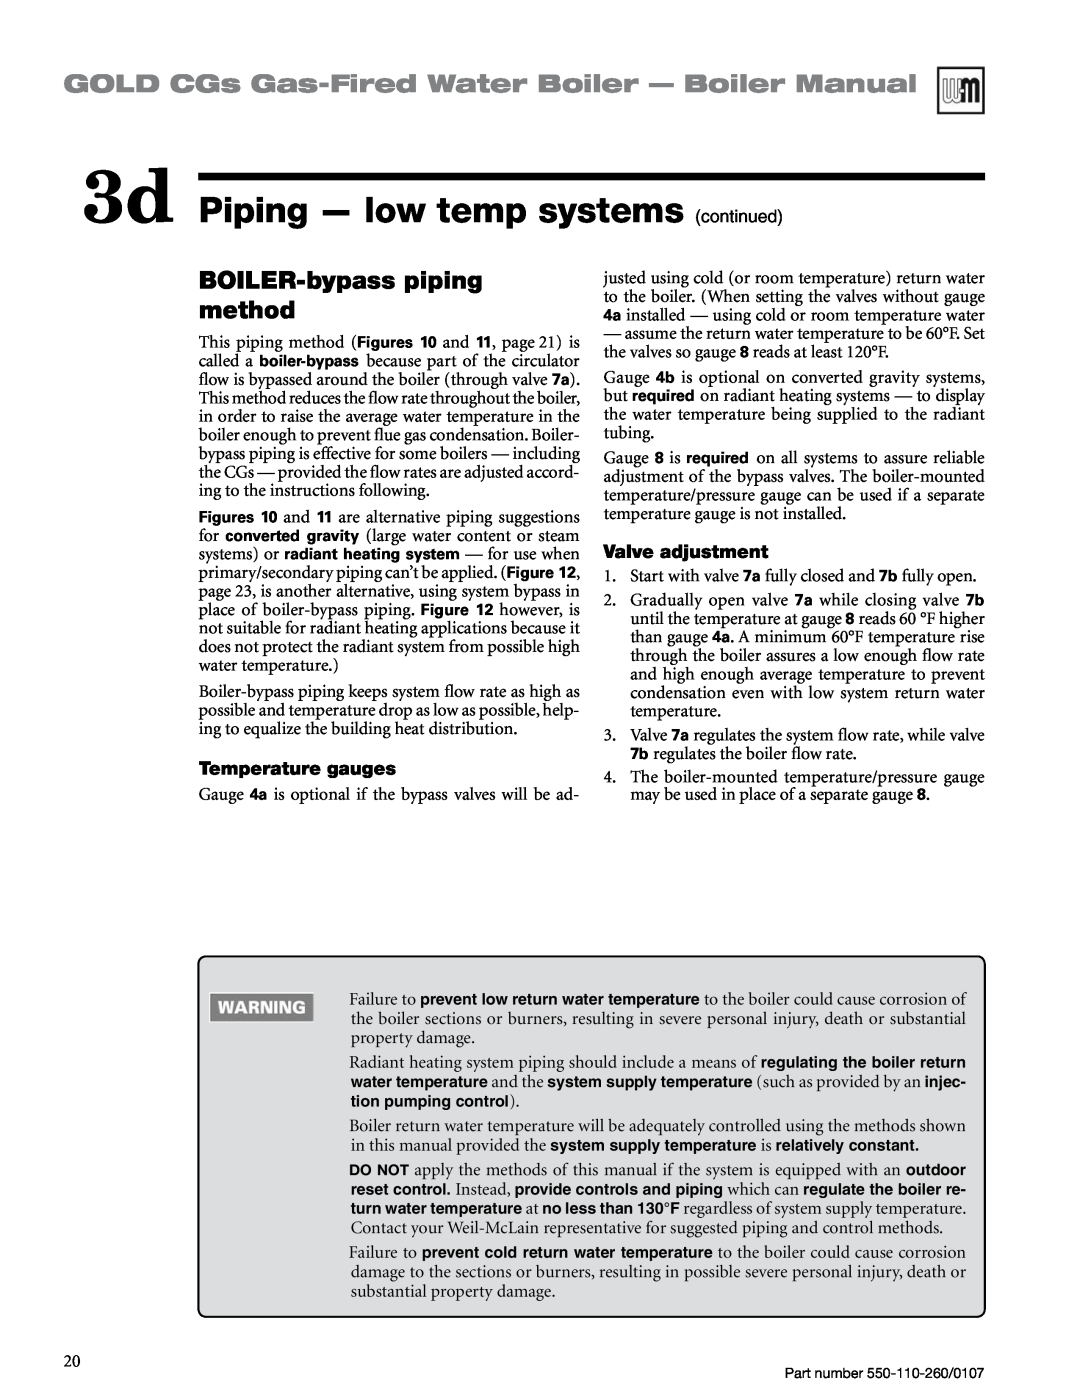 Weil-McLain 550-110-260/0107 manual BOILER-bypasspiping method, 3d Piping — low temp systems continued, Temperature gauges 